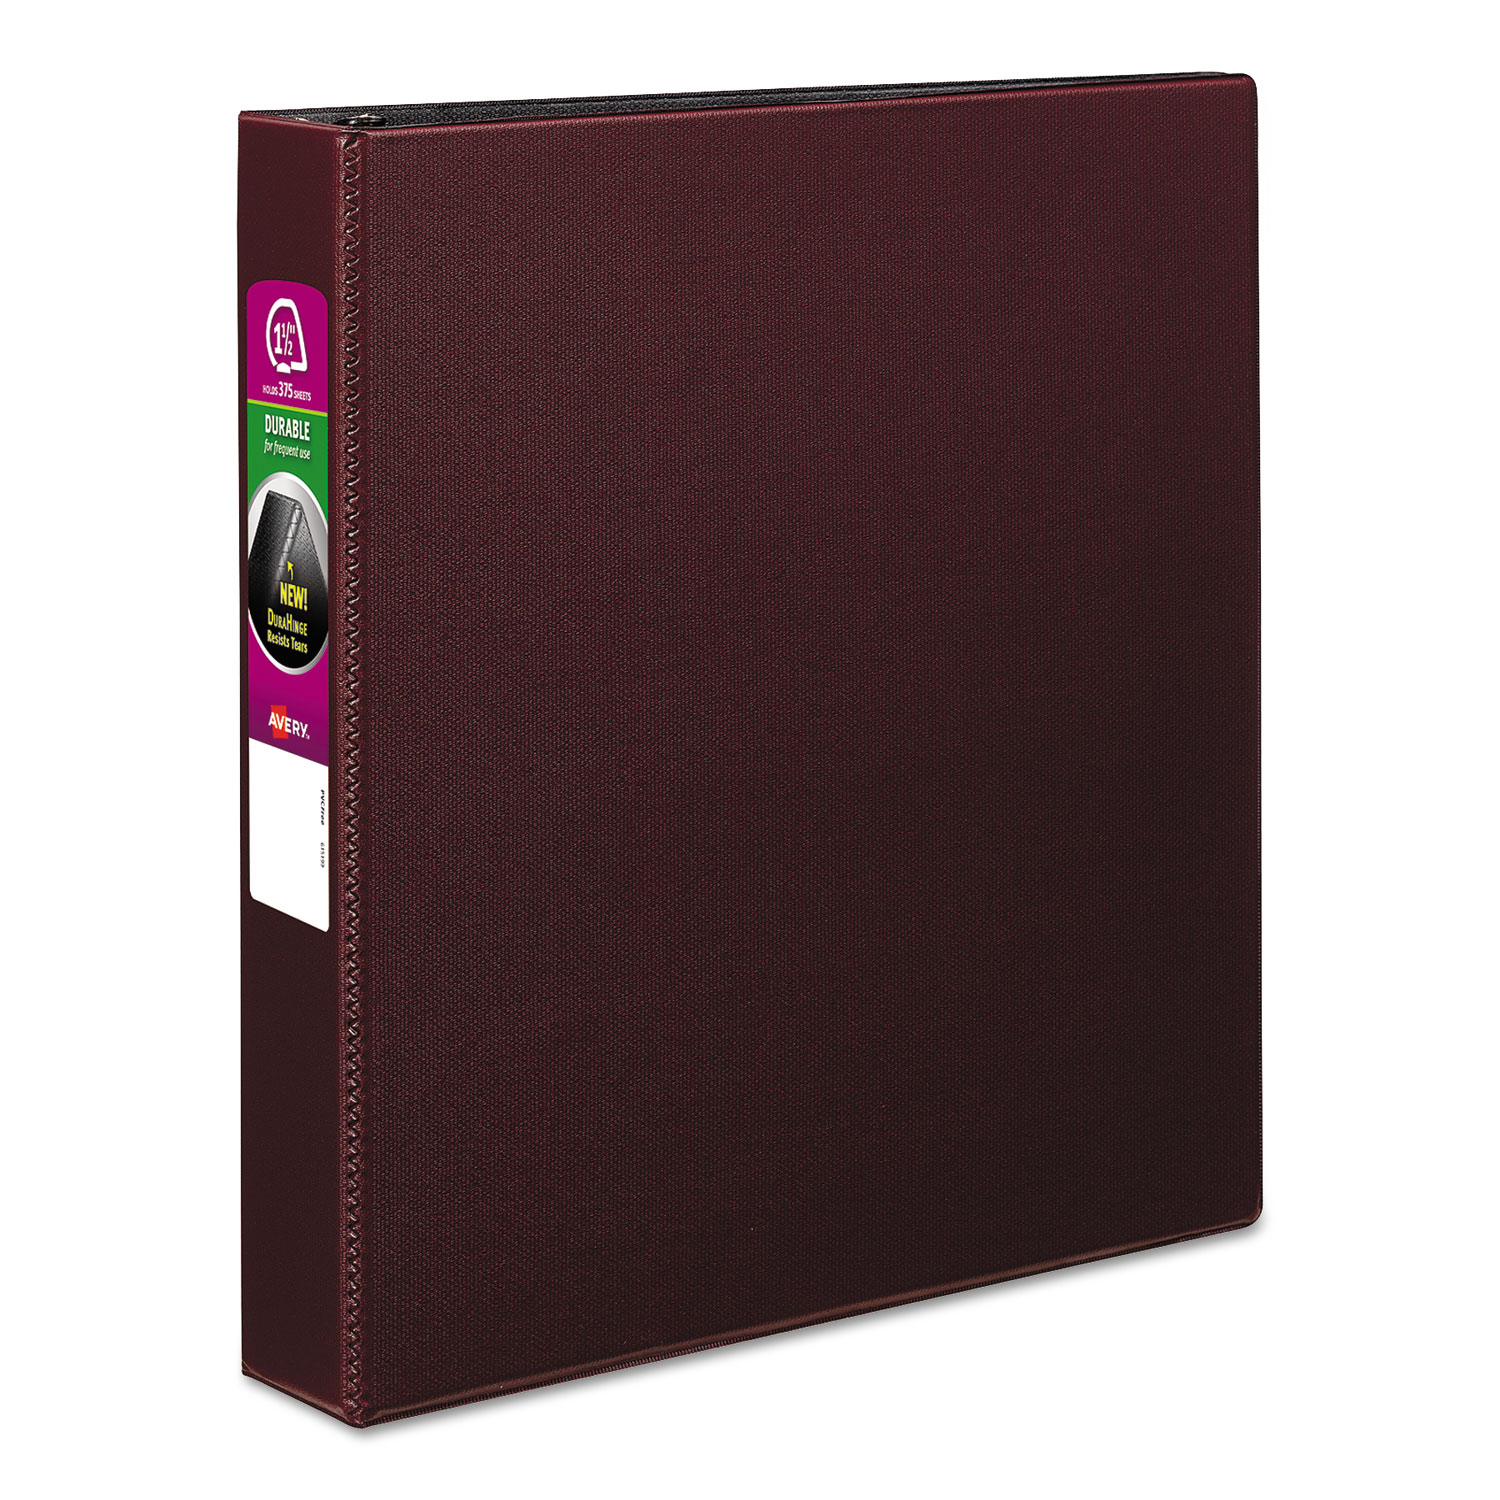  Avery 27352 Durable Non-View Binder with DuraHinge and Slant Rings, 3 Rings, 1.5 Capacity, 11 x 8.5, Burgundy (AVE27352) 